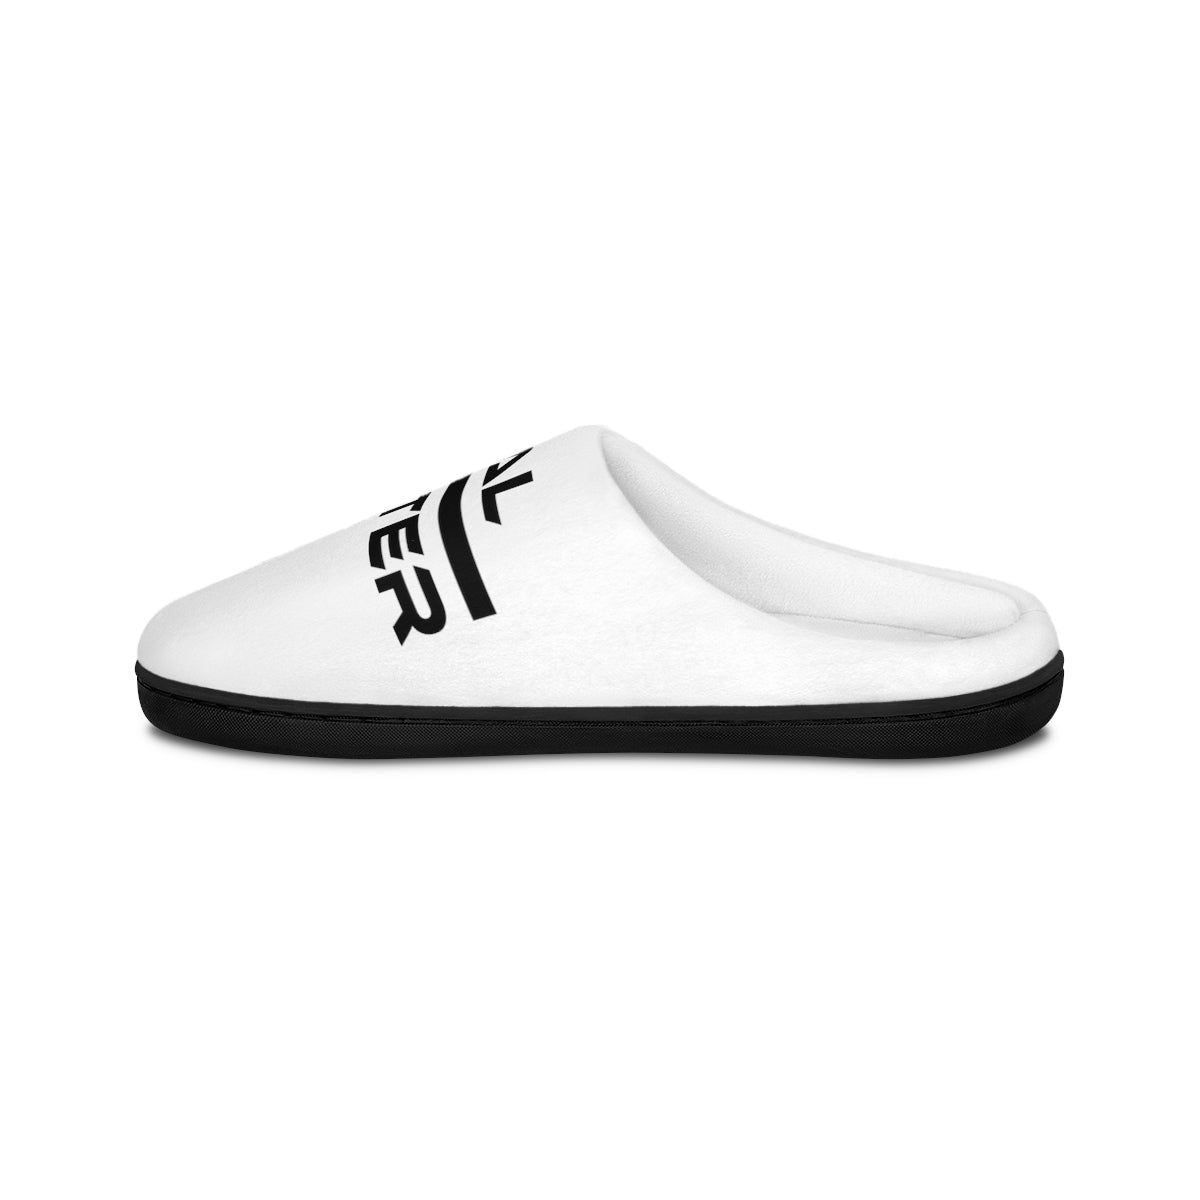 Real Fighter Brand™ Indoor Slippers